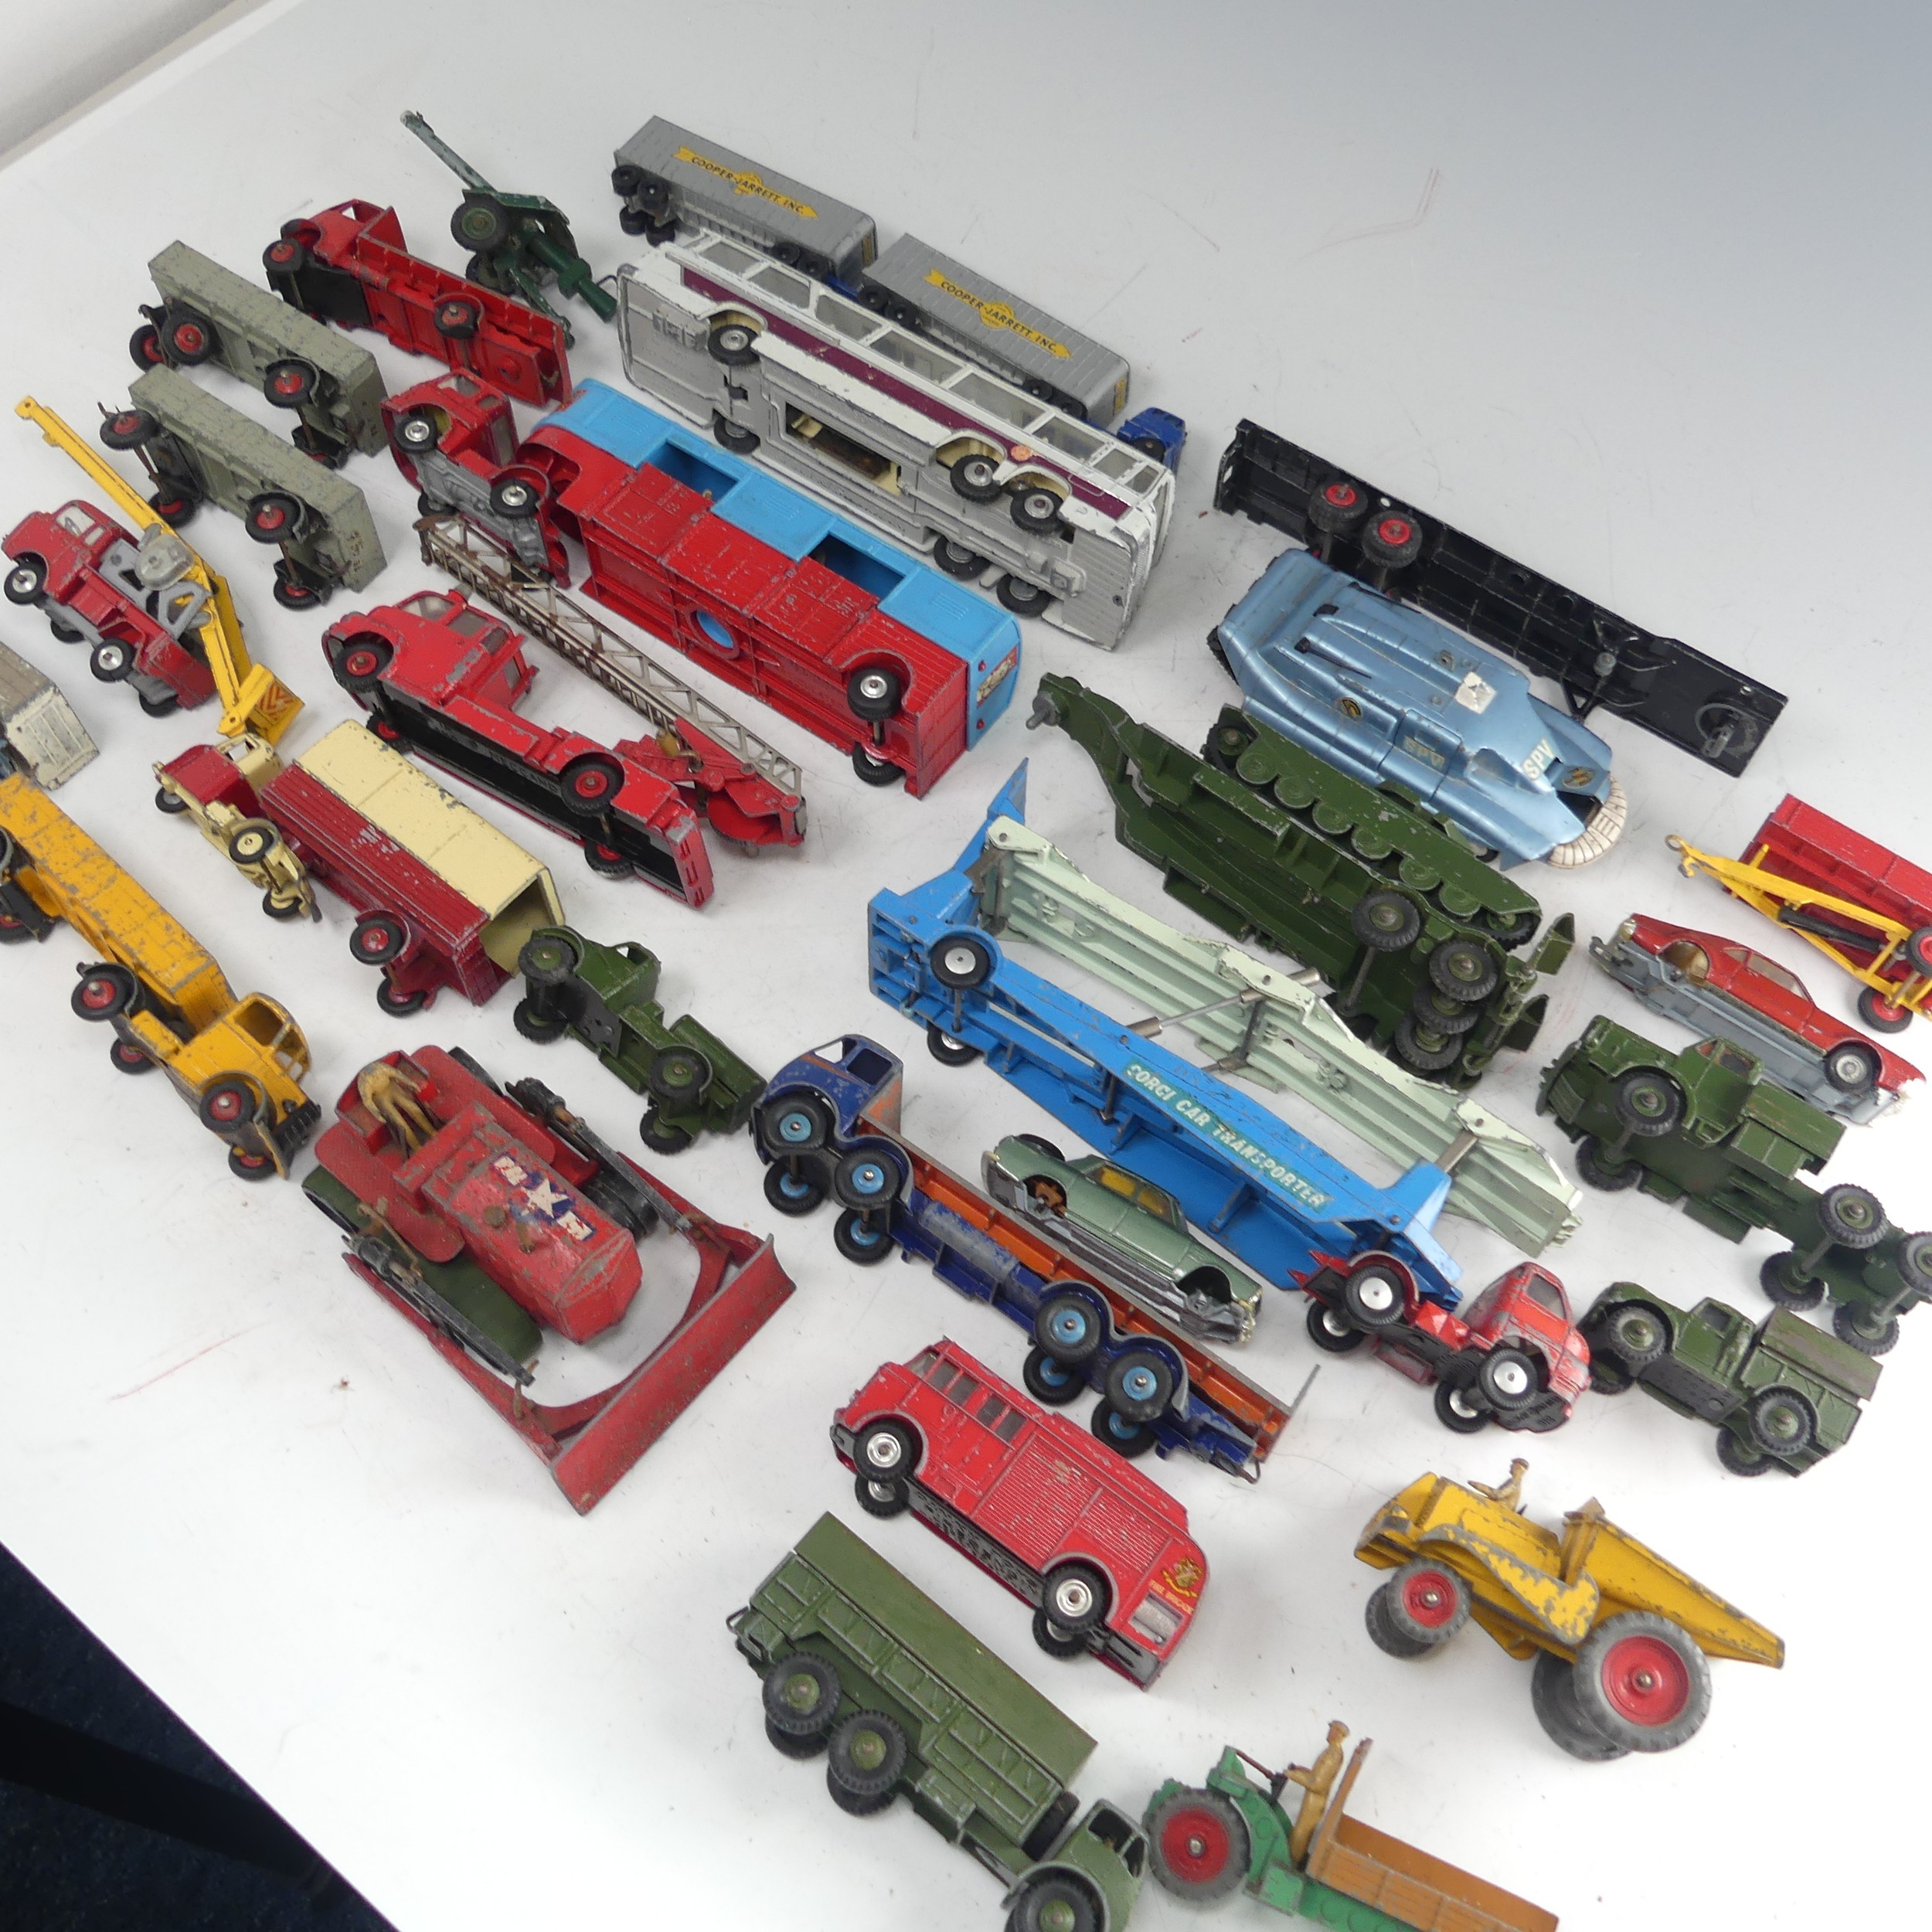 A collection of play-worn die-cast metal toy model cars, commercial and army vehicles, mostly